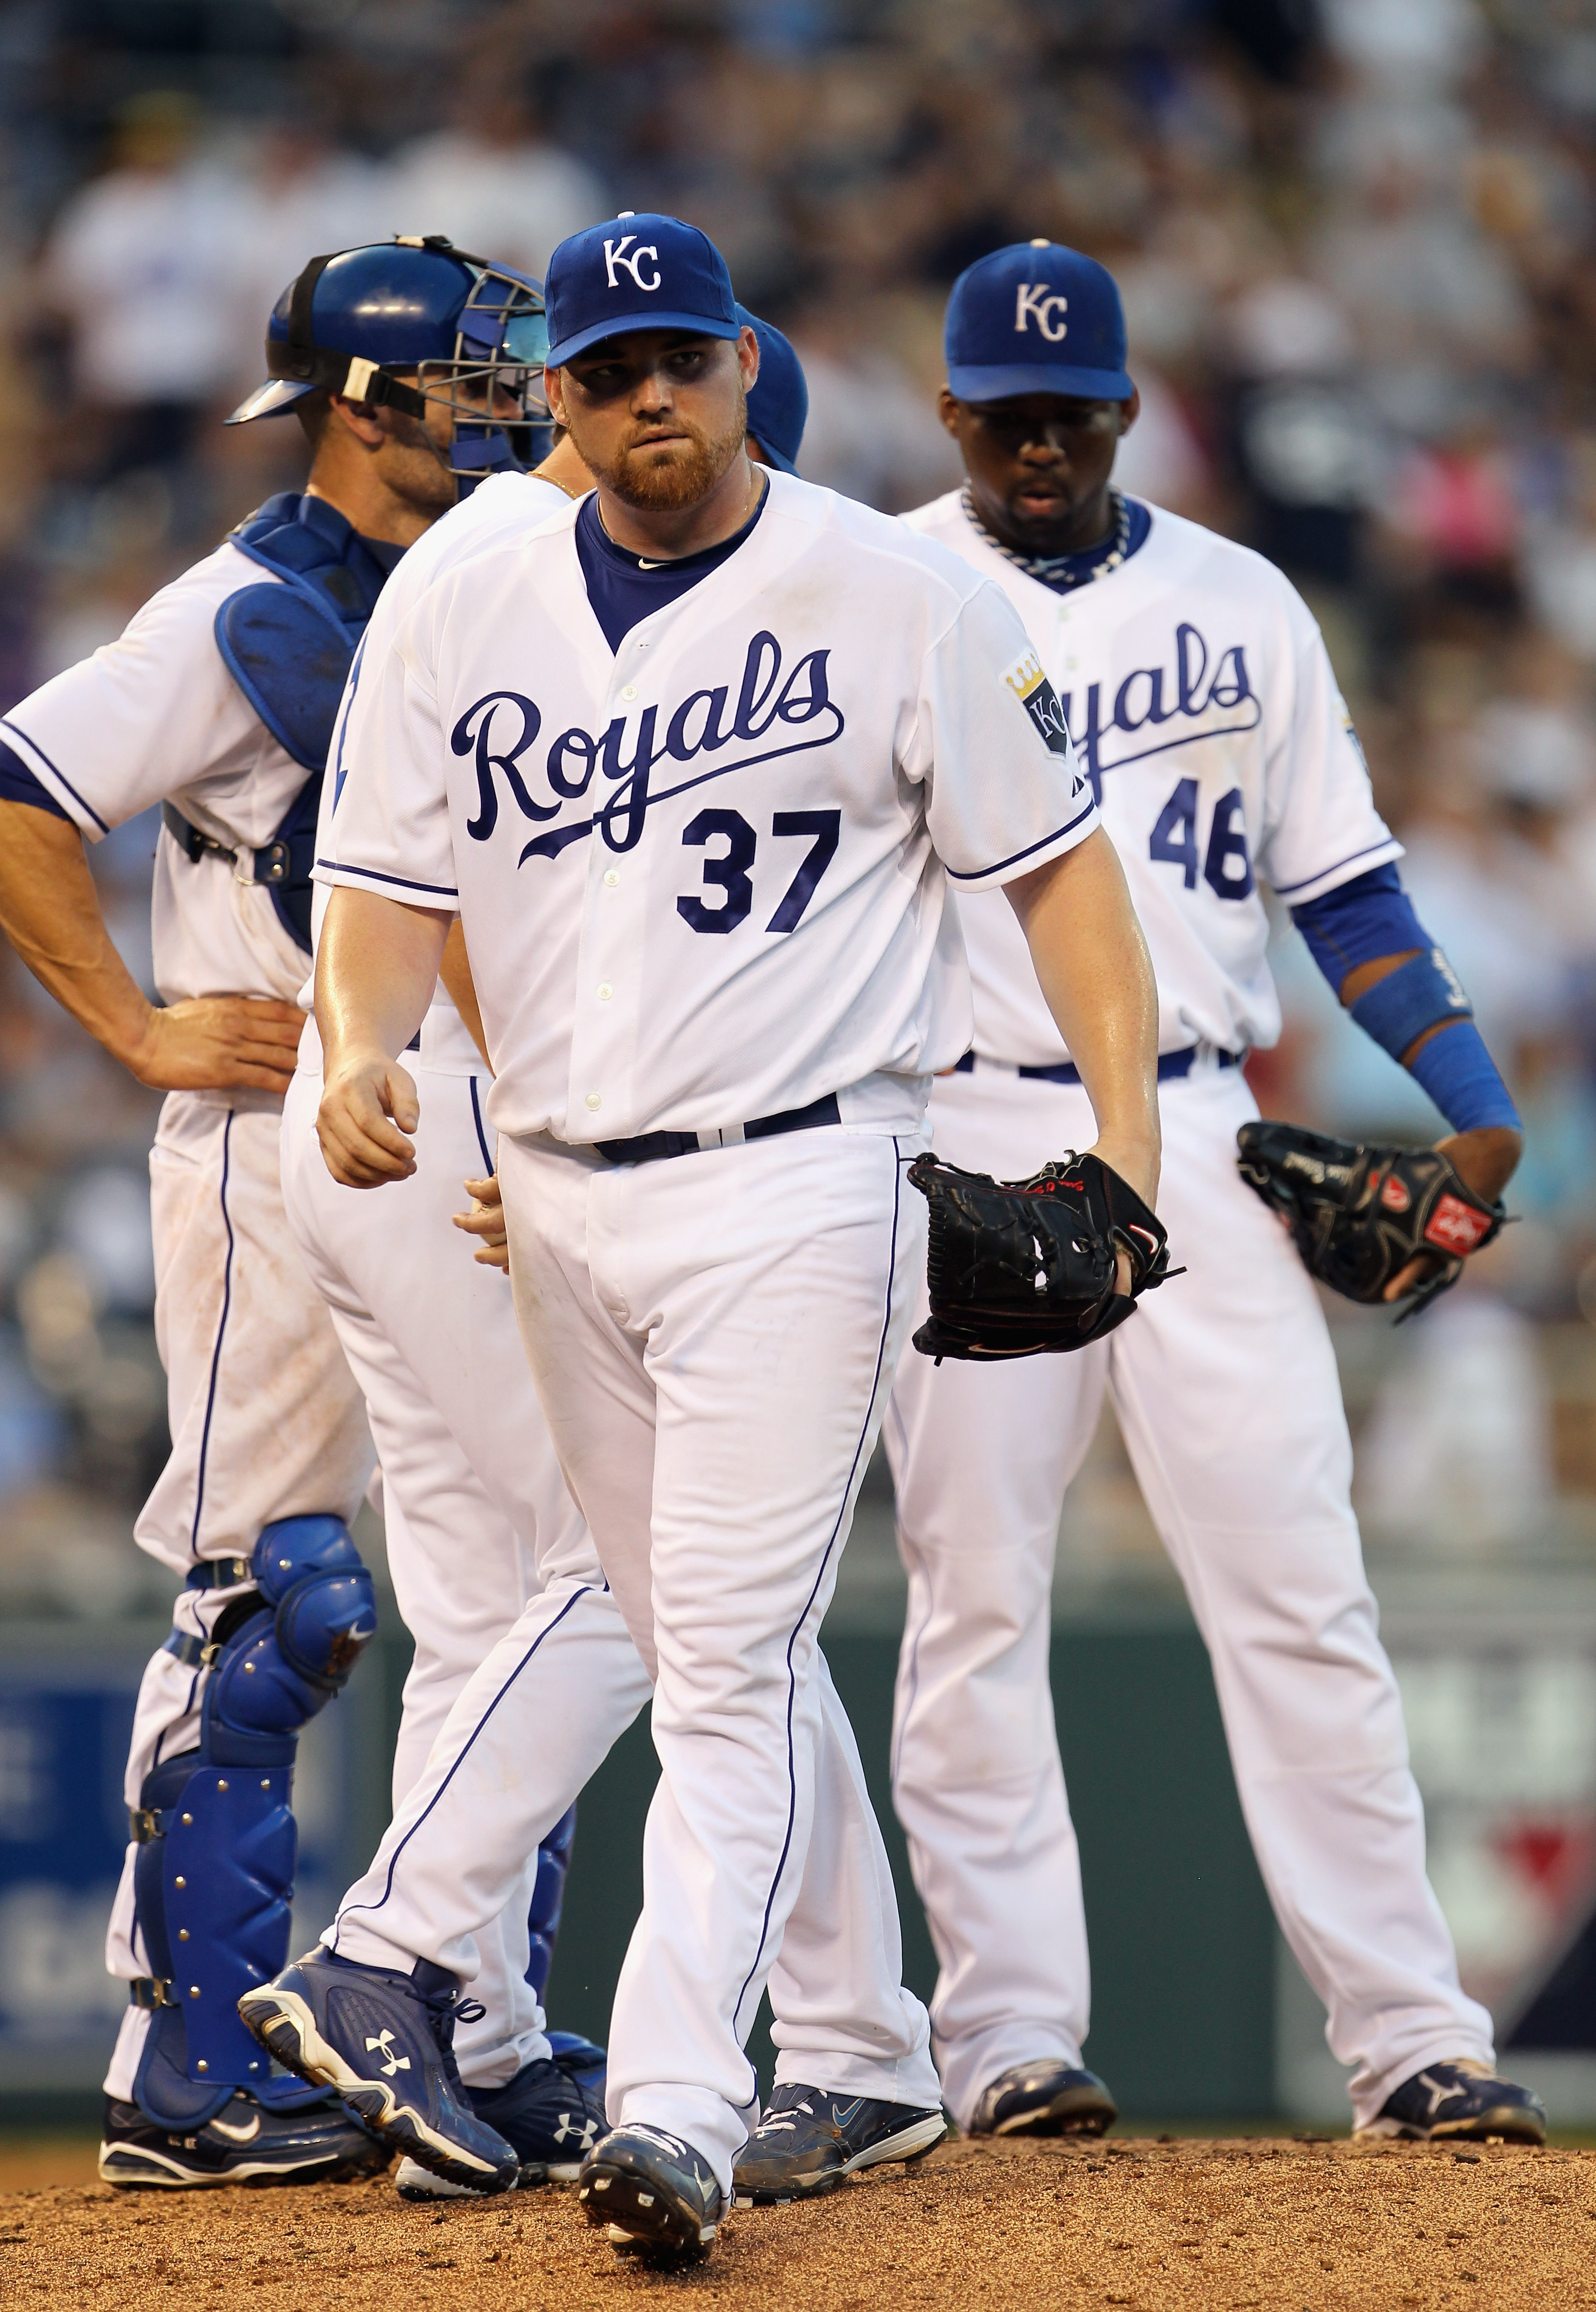 KANSAS CITY, MO - AUGUST 14:  Starting pitcher Sean O'Sullivan #37 of the Kansas City Royals walks off the field during the game against the New York Yankees on August 14, 2010 at Kauffman Stadium in Kansas City, Missouri.  (Photo by Jamie Squire/Getty Im